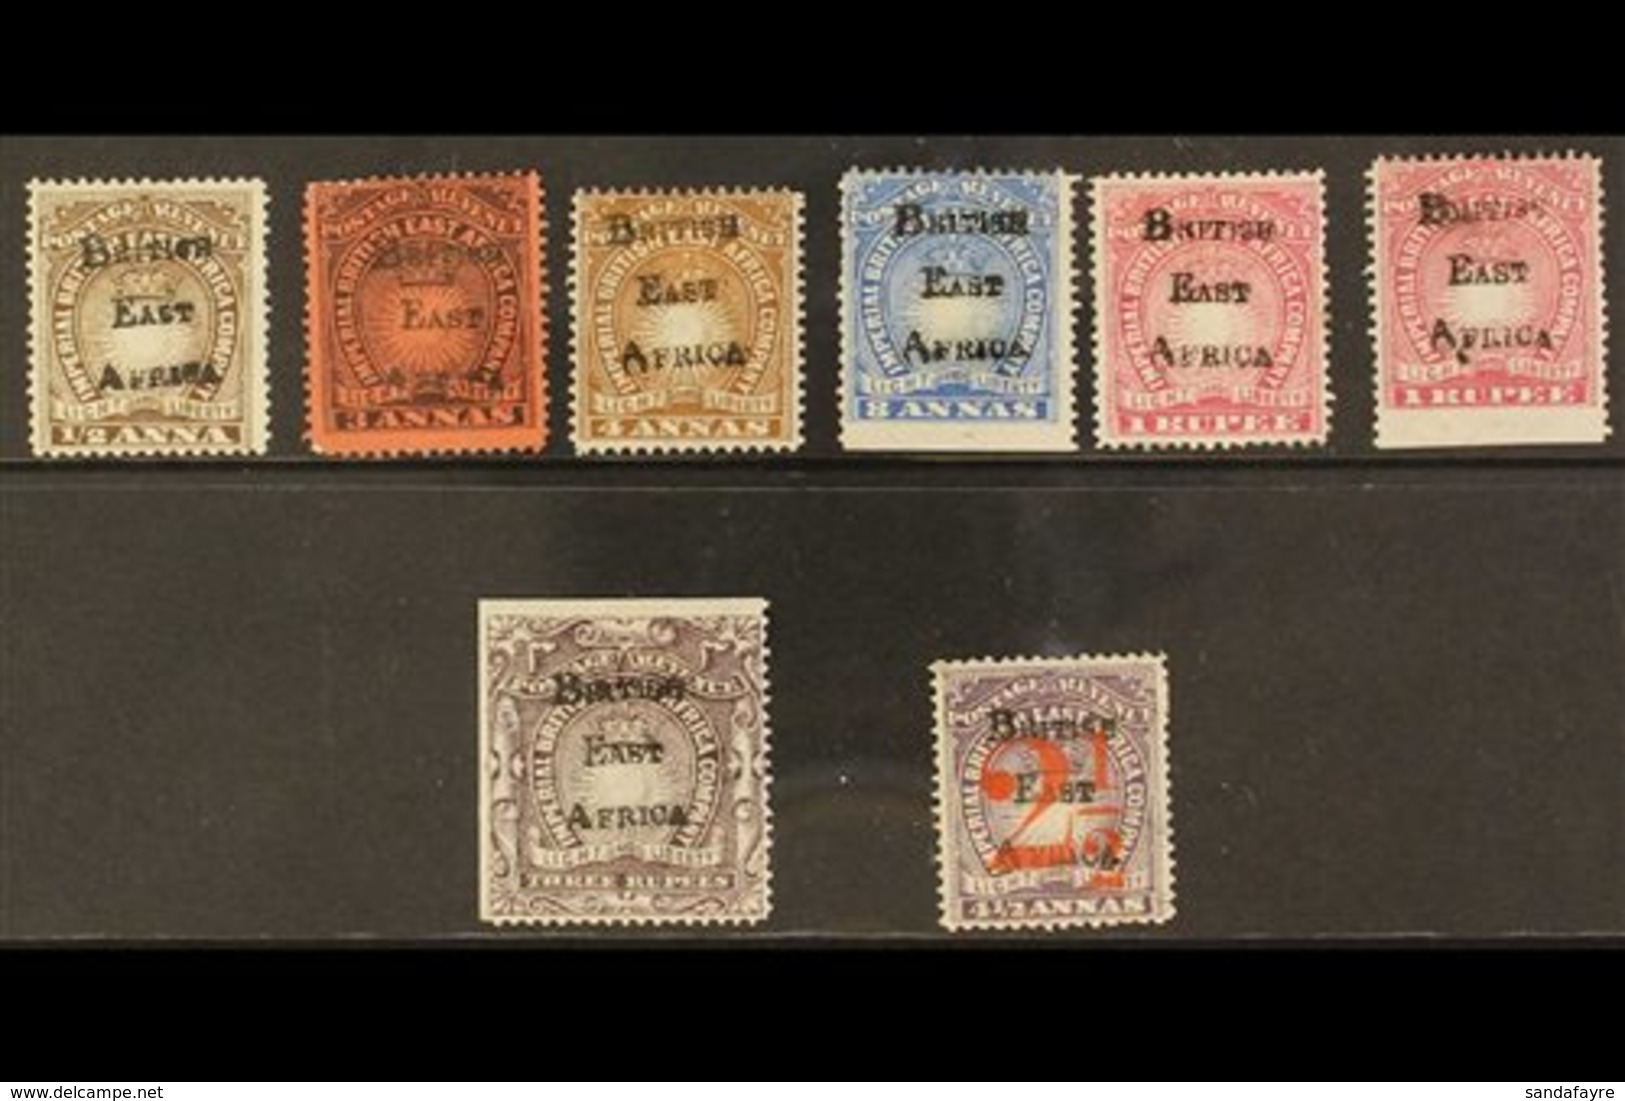 1895 "BRITISH EAST AFRICA" HANDSTAMPS On "Light And Liberty" Types Of 1890, A Useful Mint Or Unused Group With ½a, 3a, 4 - Afrique Orientale Britannique